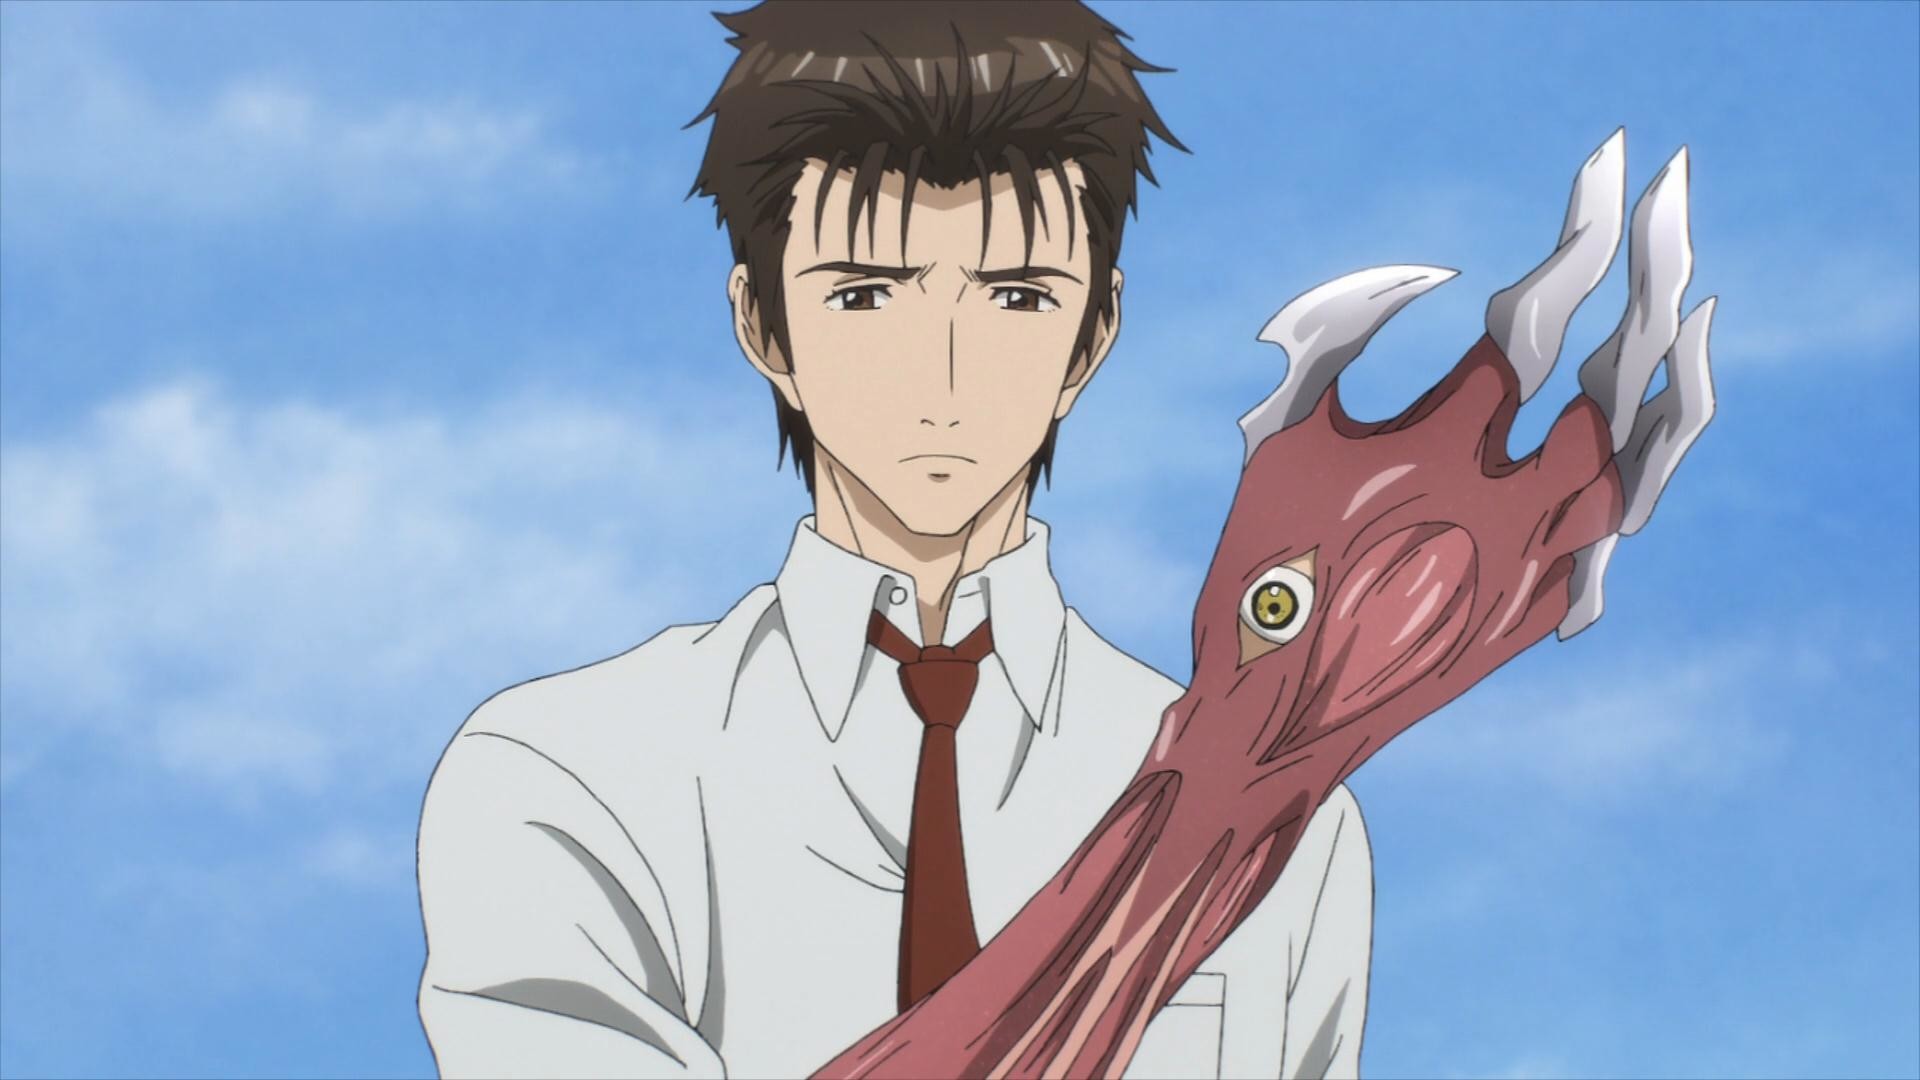 For whatever reason, I thought that Parasyte The Maxim was a comedy horror anime before I started watching it. I was extremely wrong